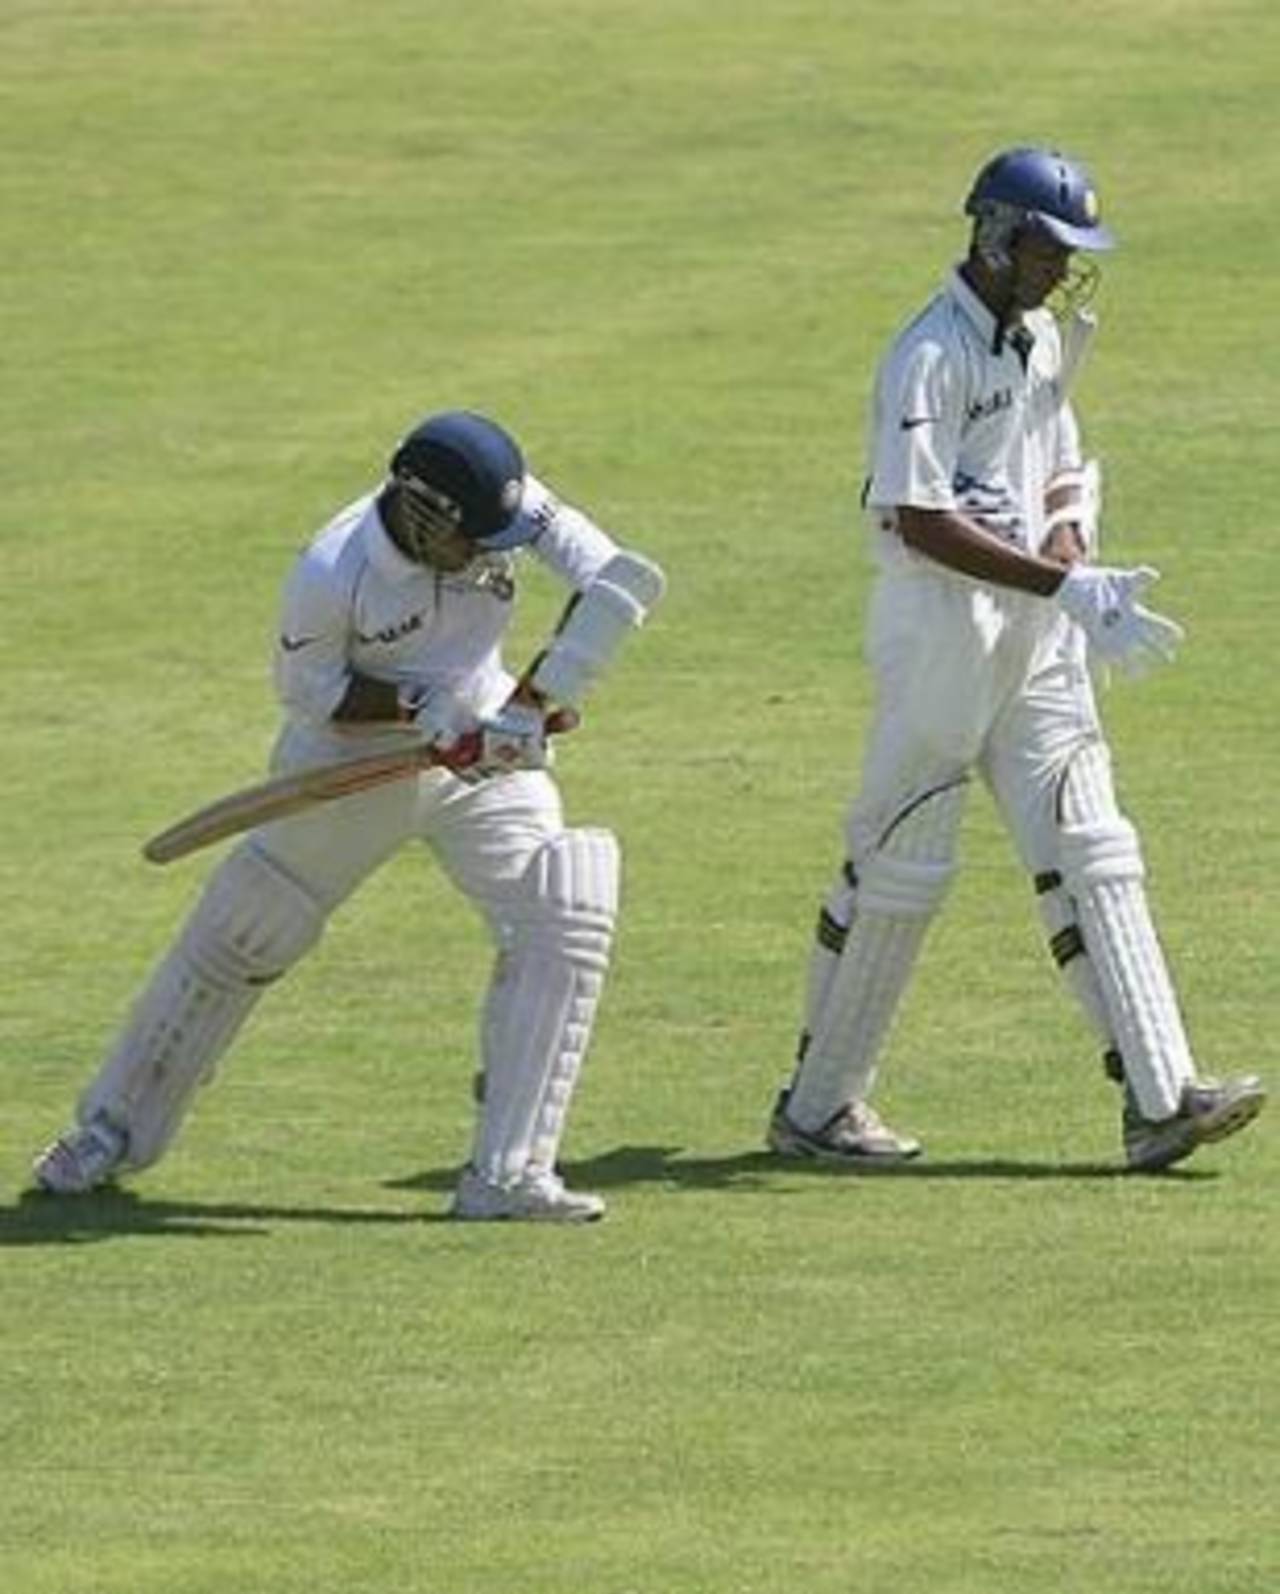 Virender Sehwag and Wasim Jaffer walk out to bat, West Indies v India, 4th Test, Jamaica, 1st day, June 30, 2006